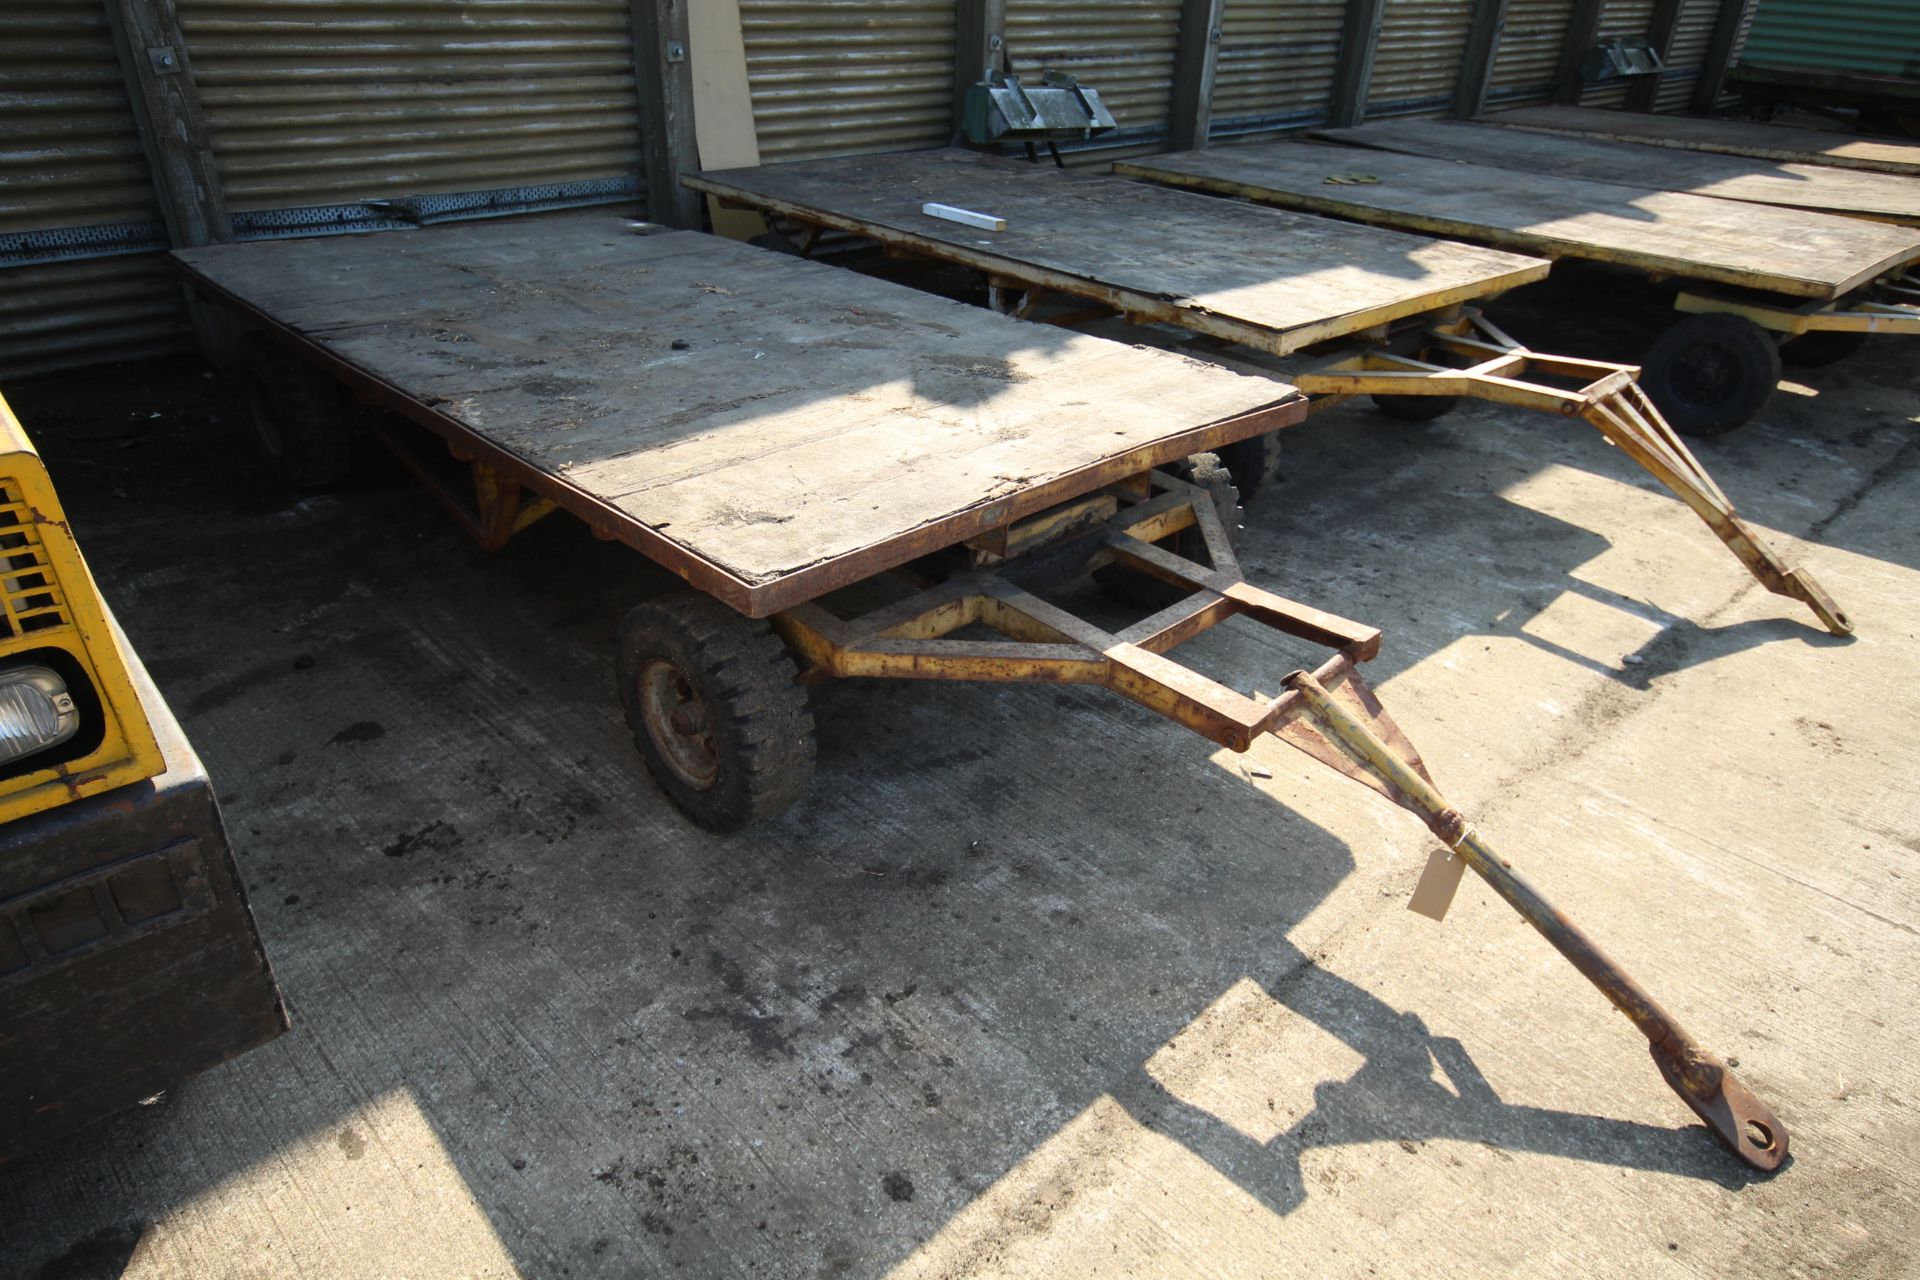 4-wheel turntable factory trailer. With solid tyres. - Image 2 of 14